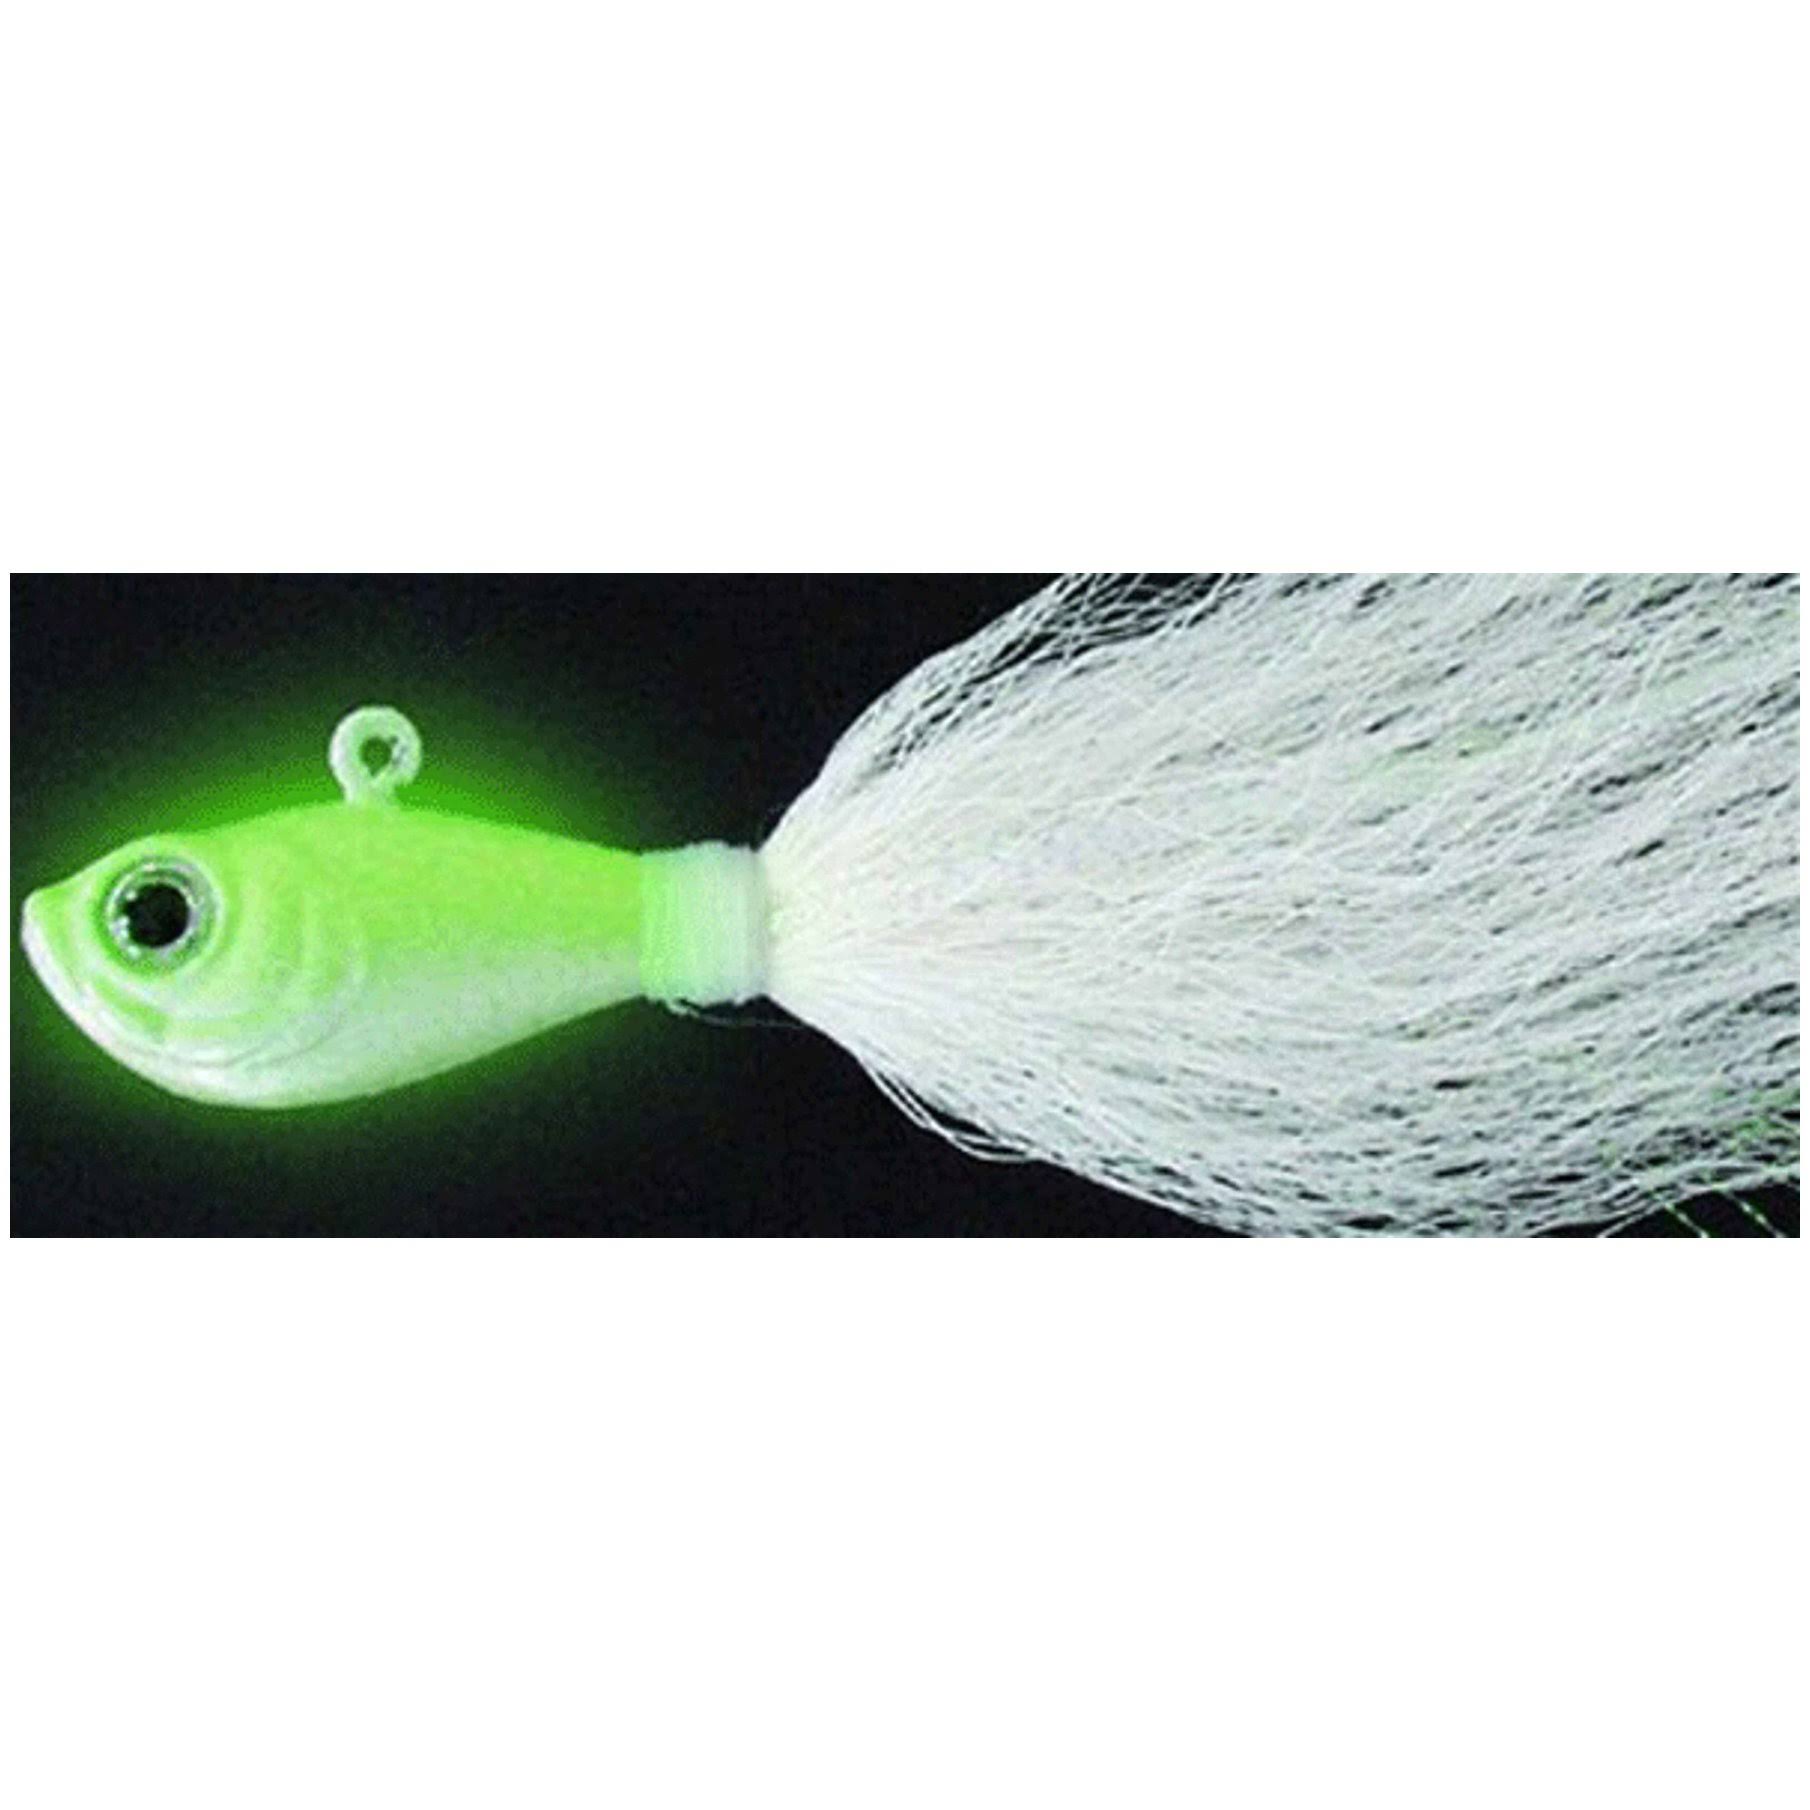 Spro Fishing Bucktail Jig | Boating & Fishing | Free Shipping On All Orders | Best Price Guarantee | 30 Day Money Back Guarantee